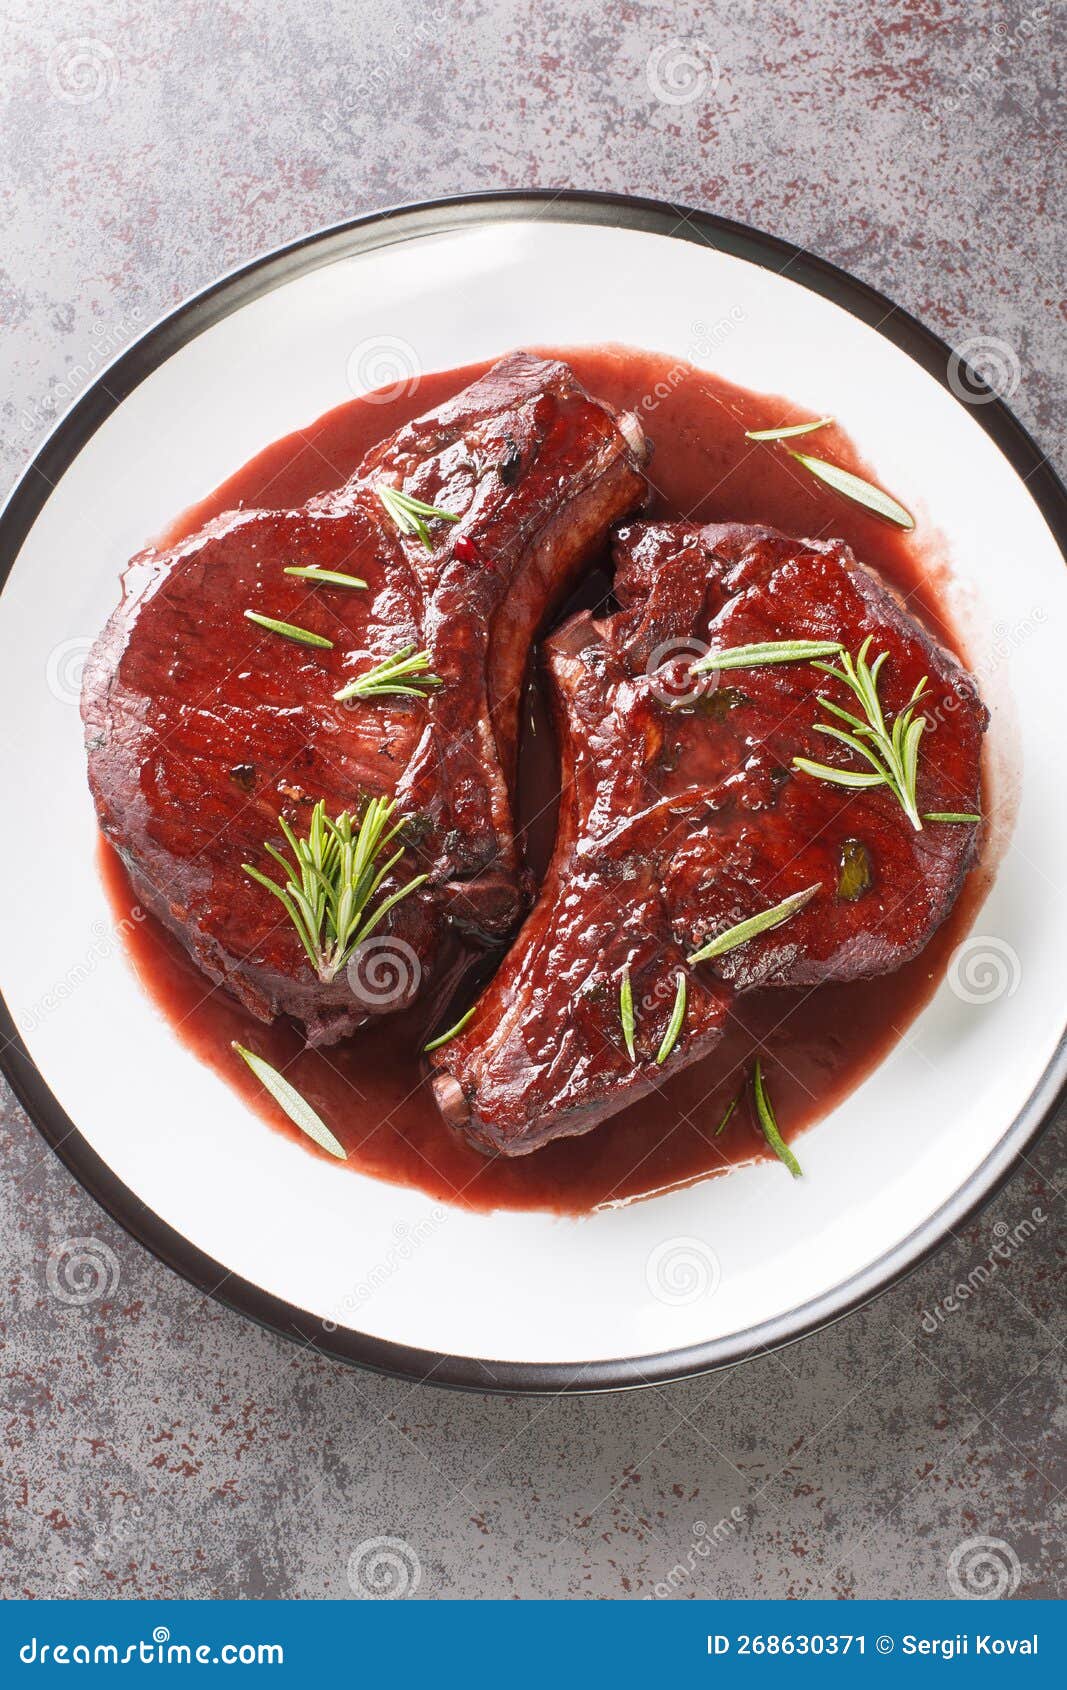 maiale ubriaco drunken pork chops in red wine sauce with herbs closeup on the plate. vertical top view